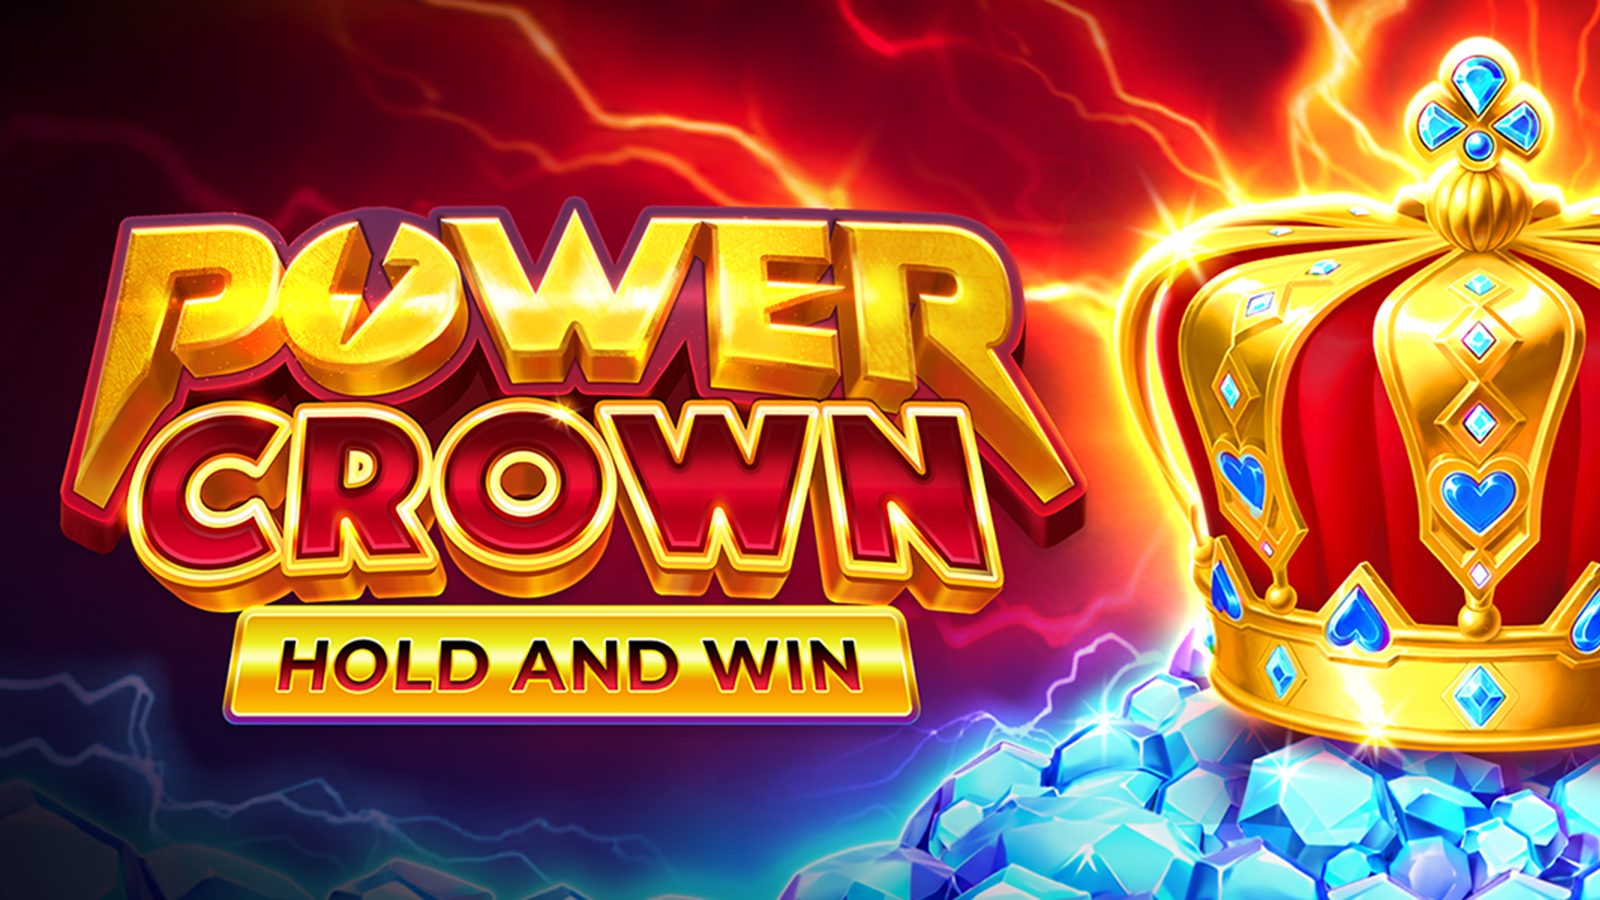 Playson - Power Crown Hold and Win